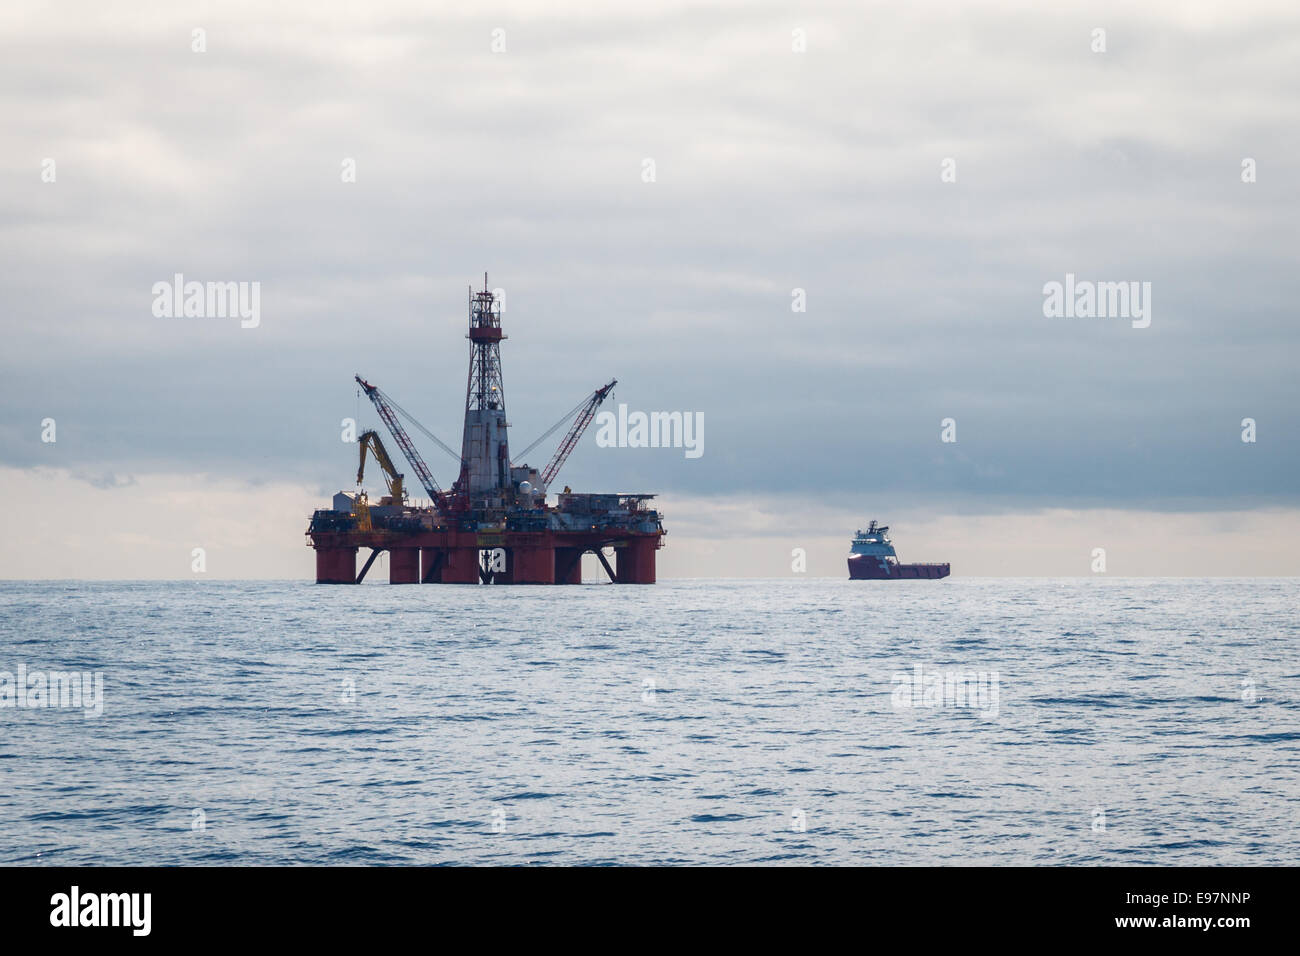 The oil drilling rig, Transocean Leader, in the Barents Sea, Norway. Stock Photo